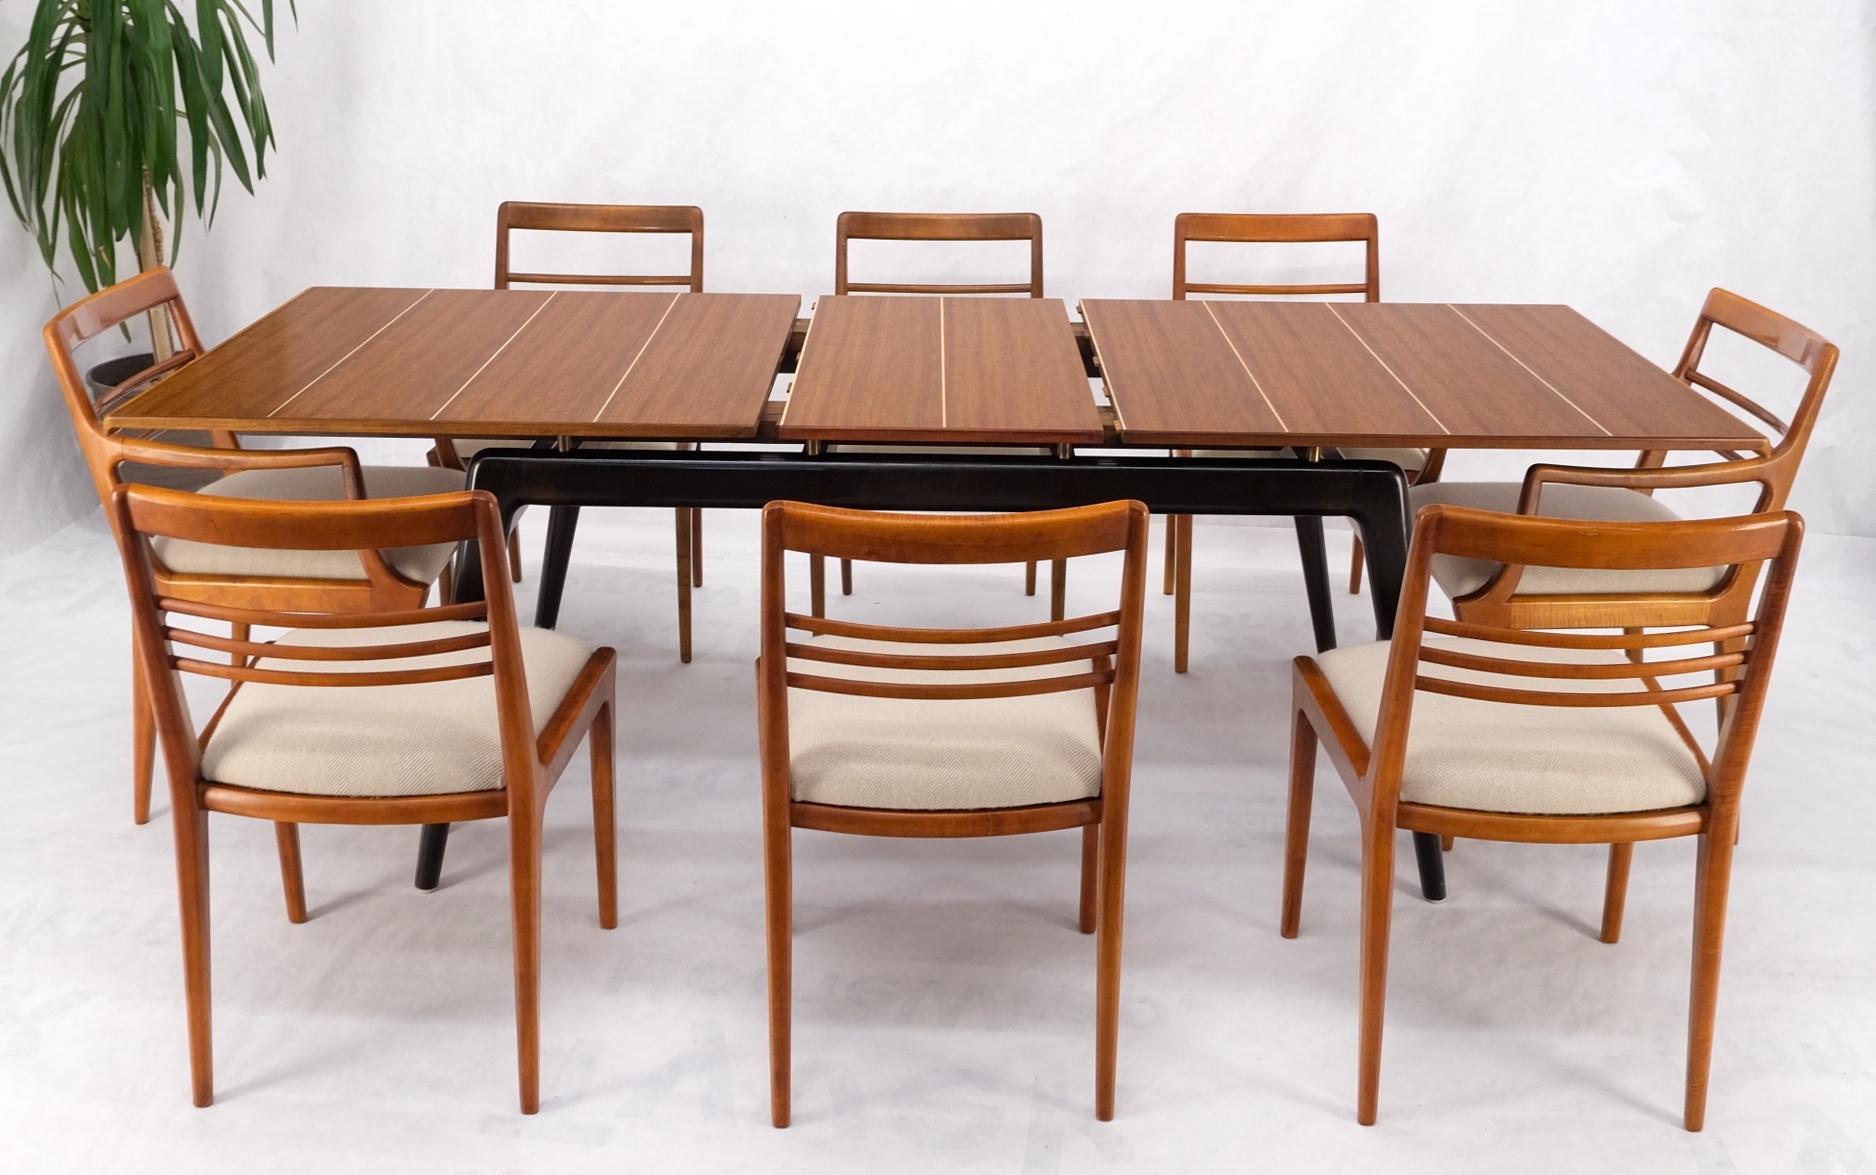 Italian Mid-Century Modern Dining Table 8 Chairs Set New Linen Upholstery Seats For Sale 10